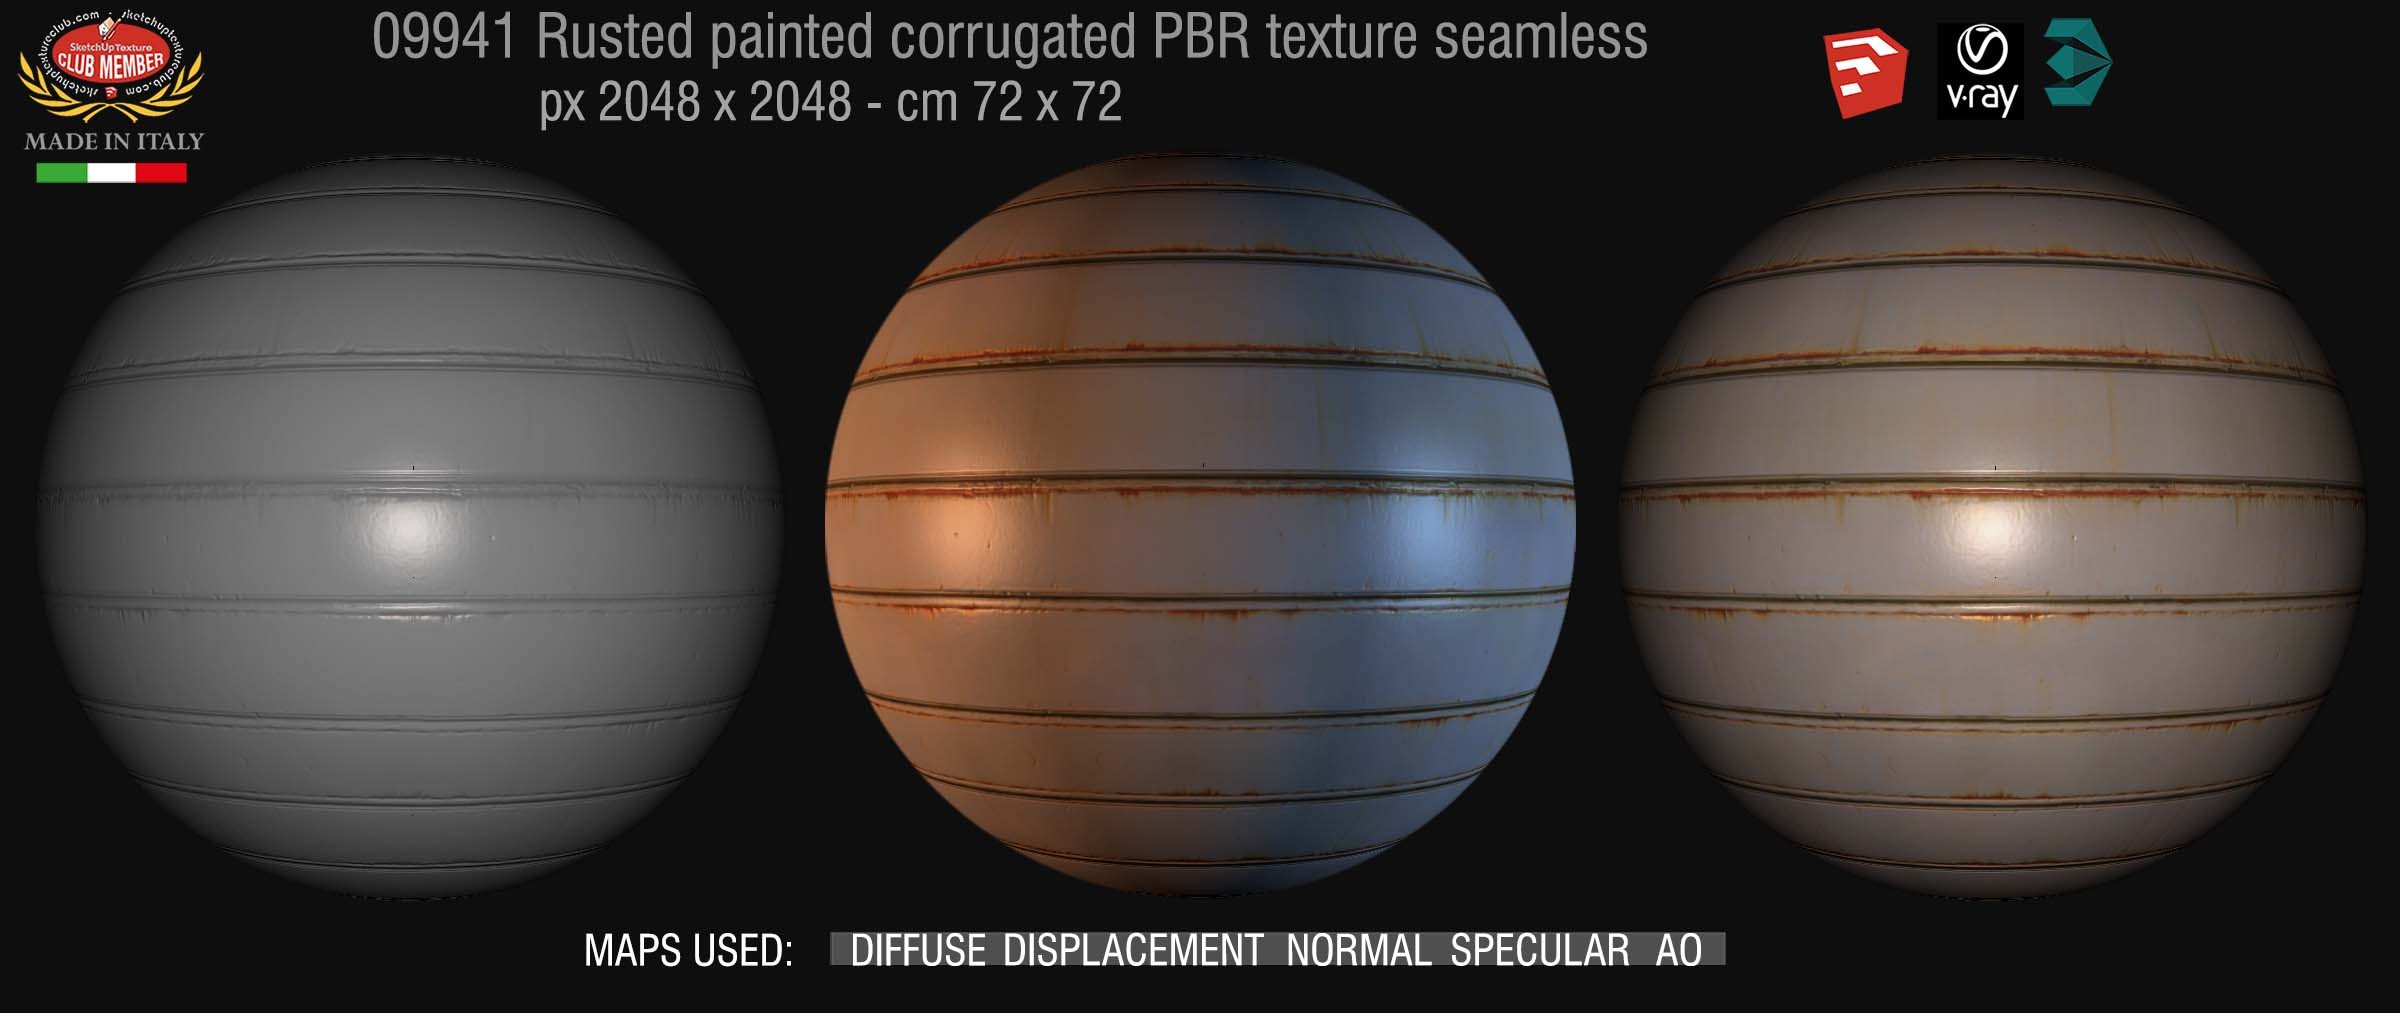 09941 Rusted painted corrugated metal PBR texture seamless DEMO